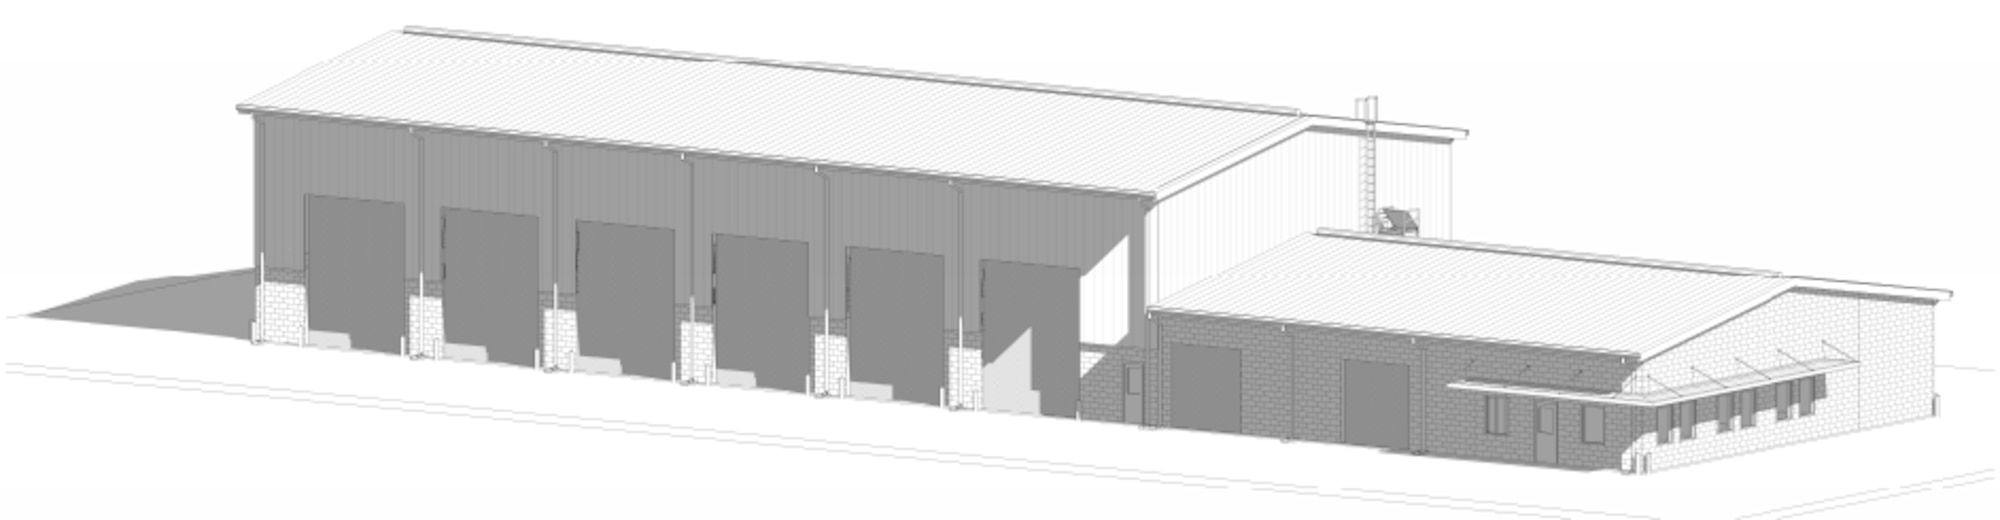 Artist rendering of Silver Flag’s new 11,915-square-foot vehicle maintenance shop. This project is part of the Tyndall Air Force Base, Florida rebuild and is expected to be completed in 2023.